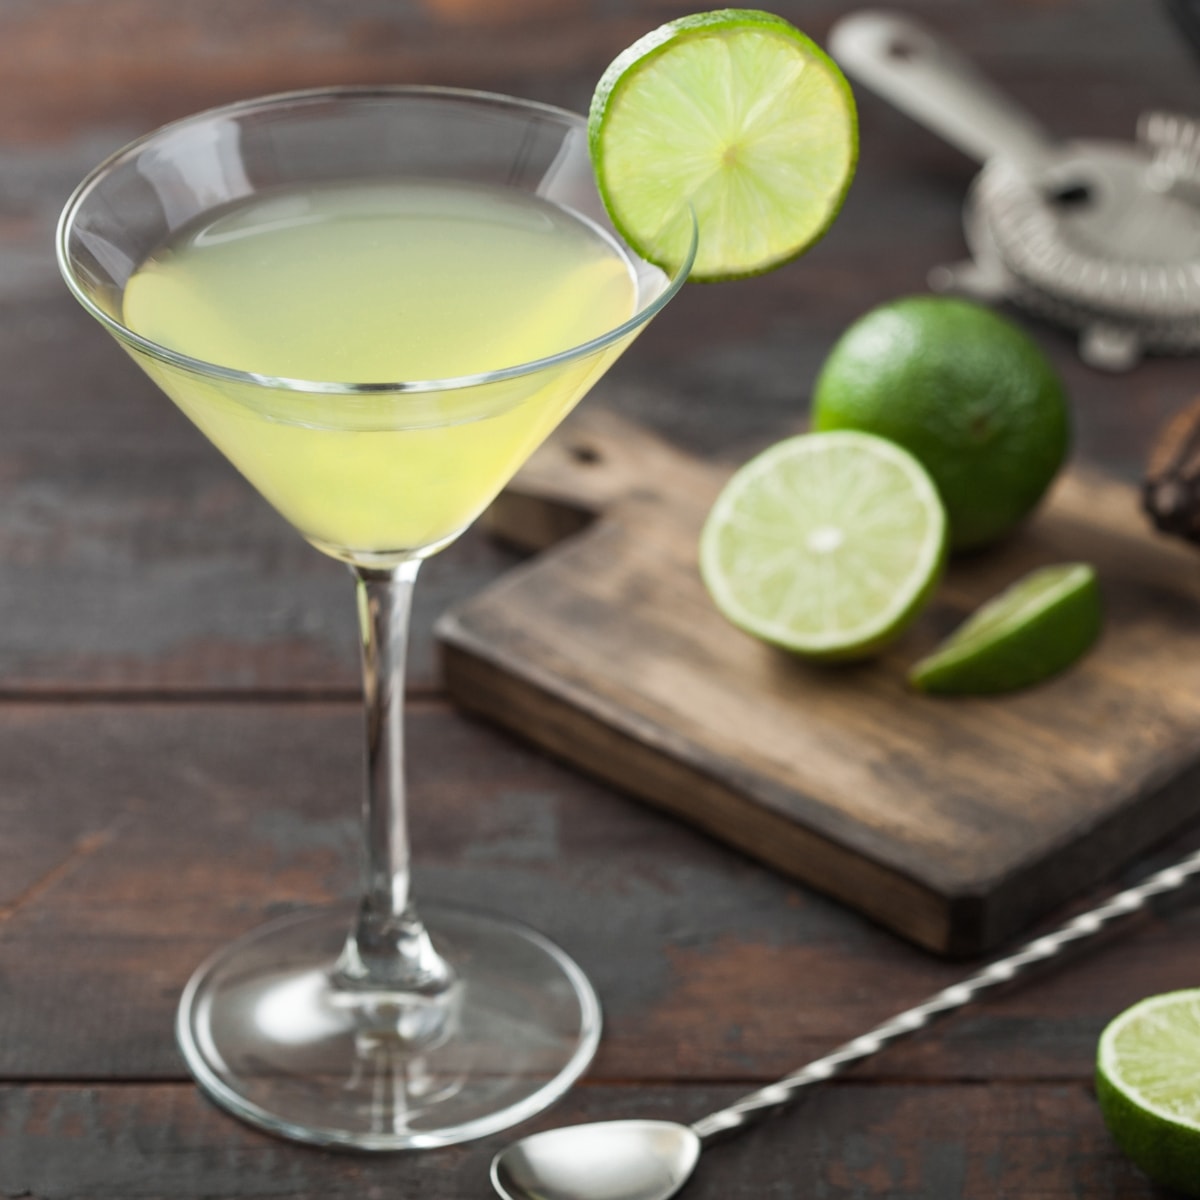 Key Lime Martini Garnished With Slice of Lime